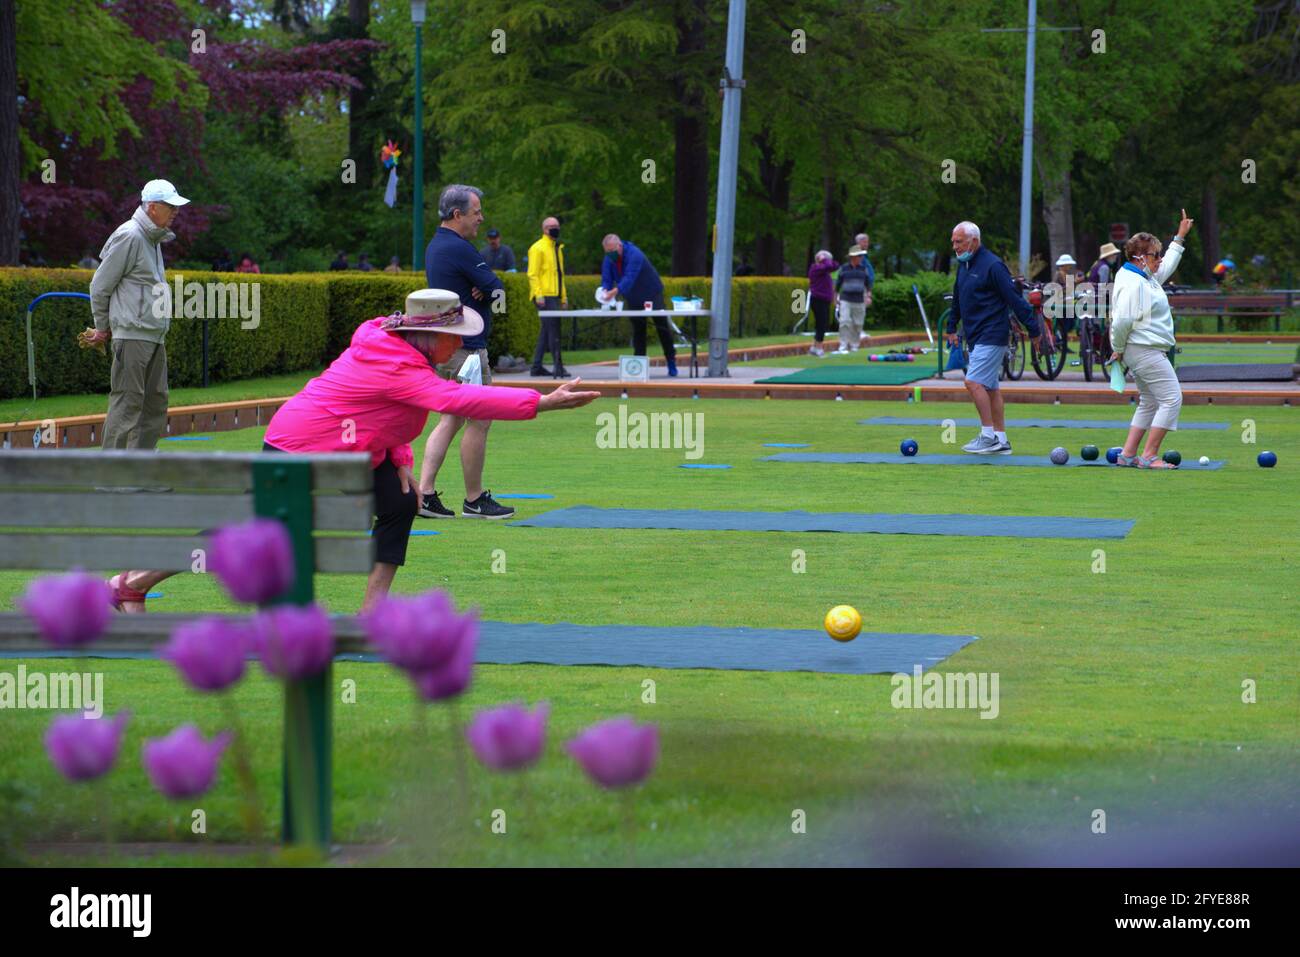 An elderly woman enjoying a beautiful  day in Stanley park, playing Lawn Bowling with friends.Vancouver,Canada Stock Photo